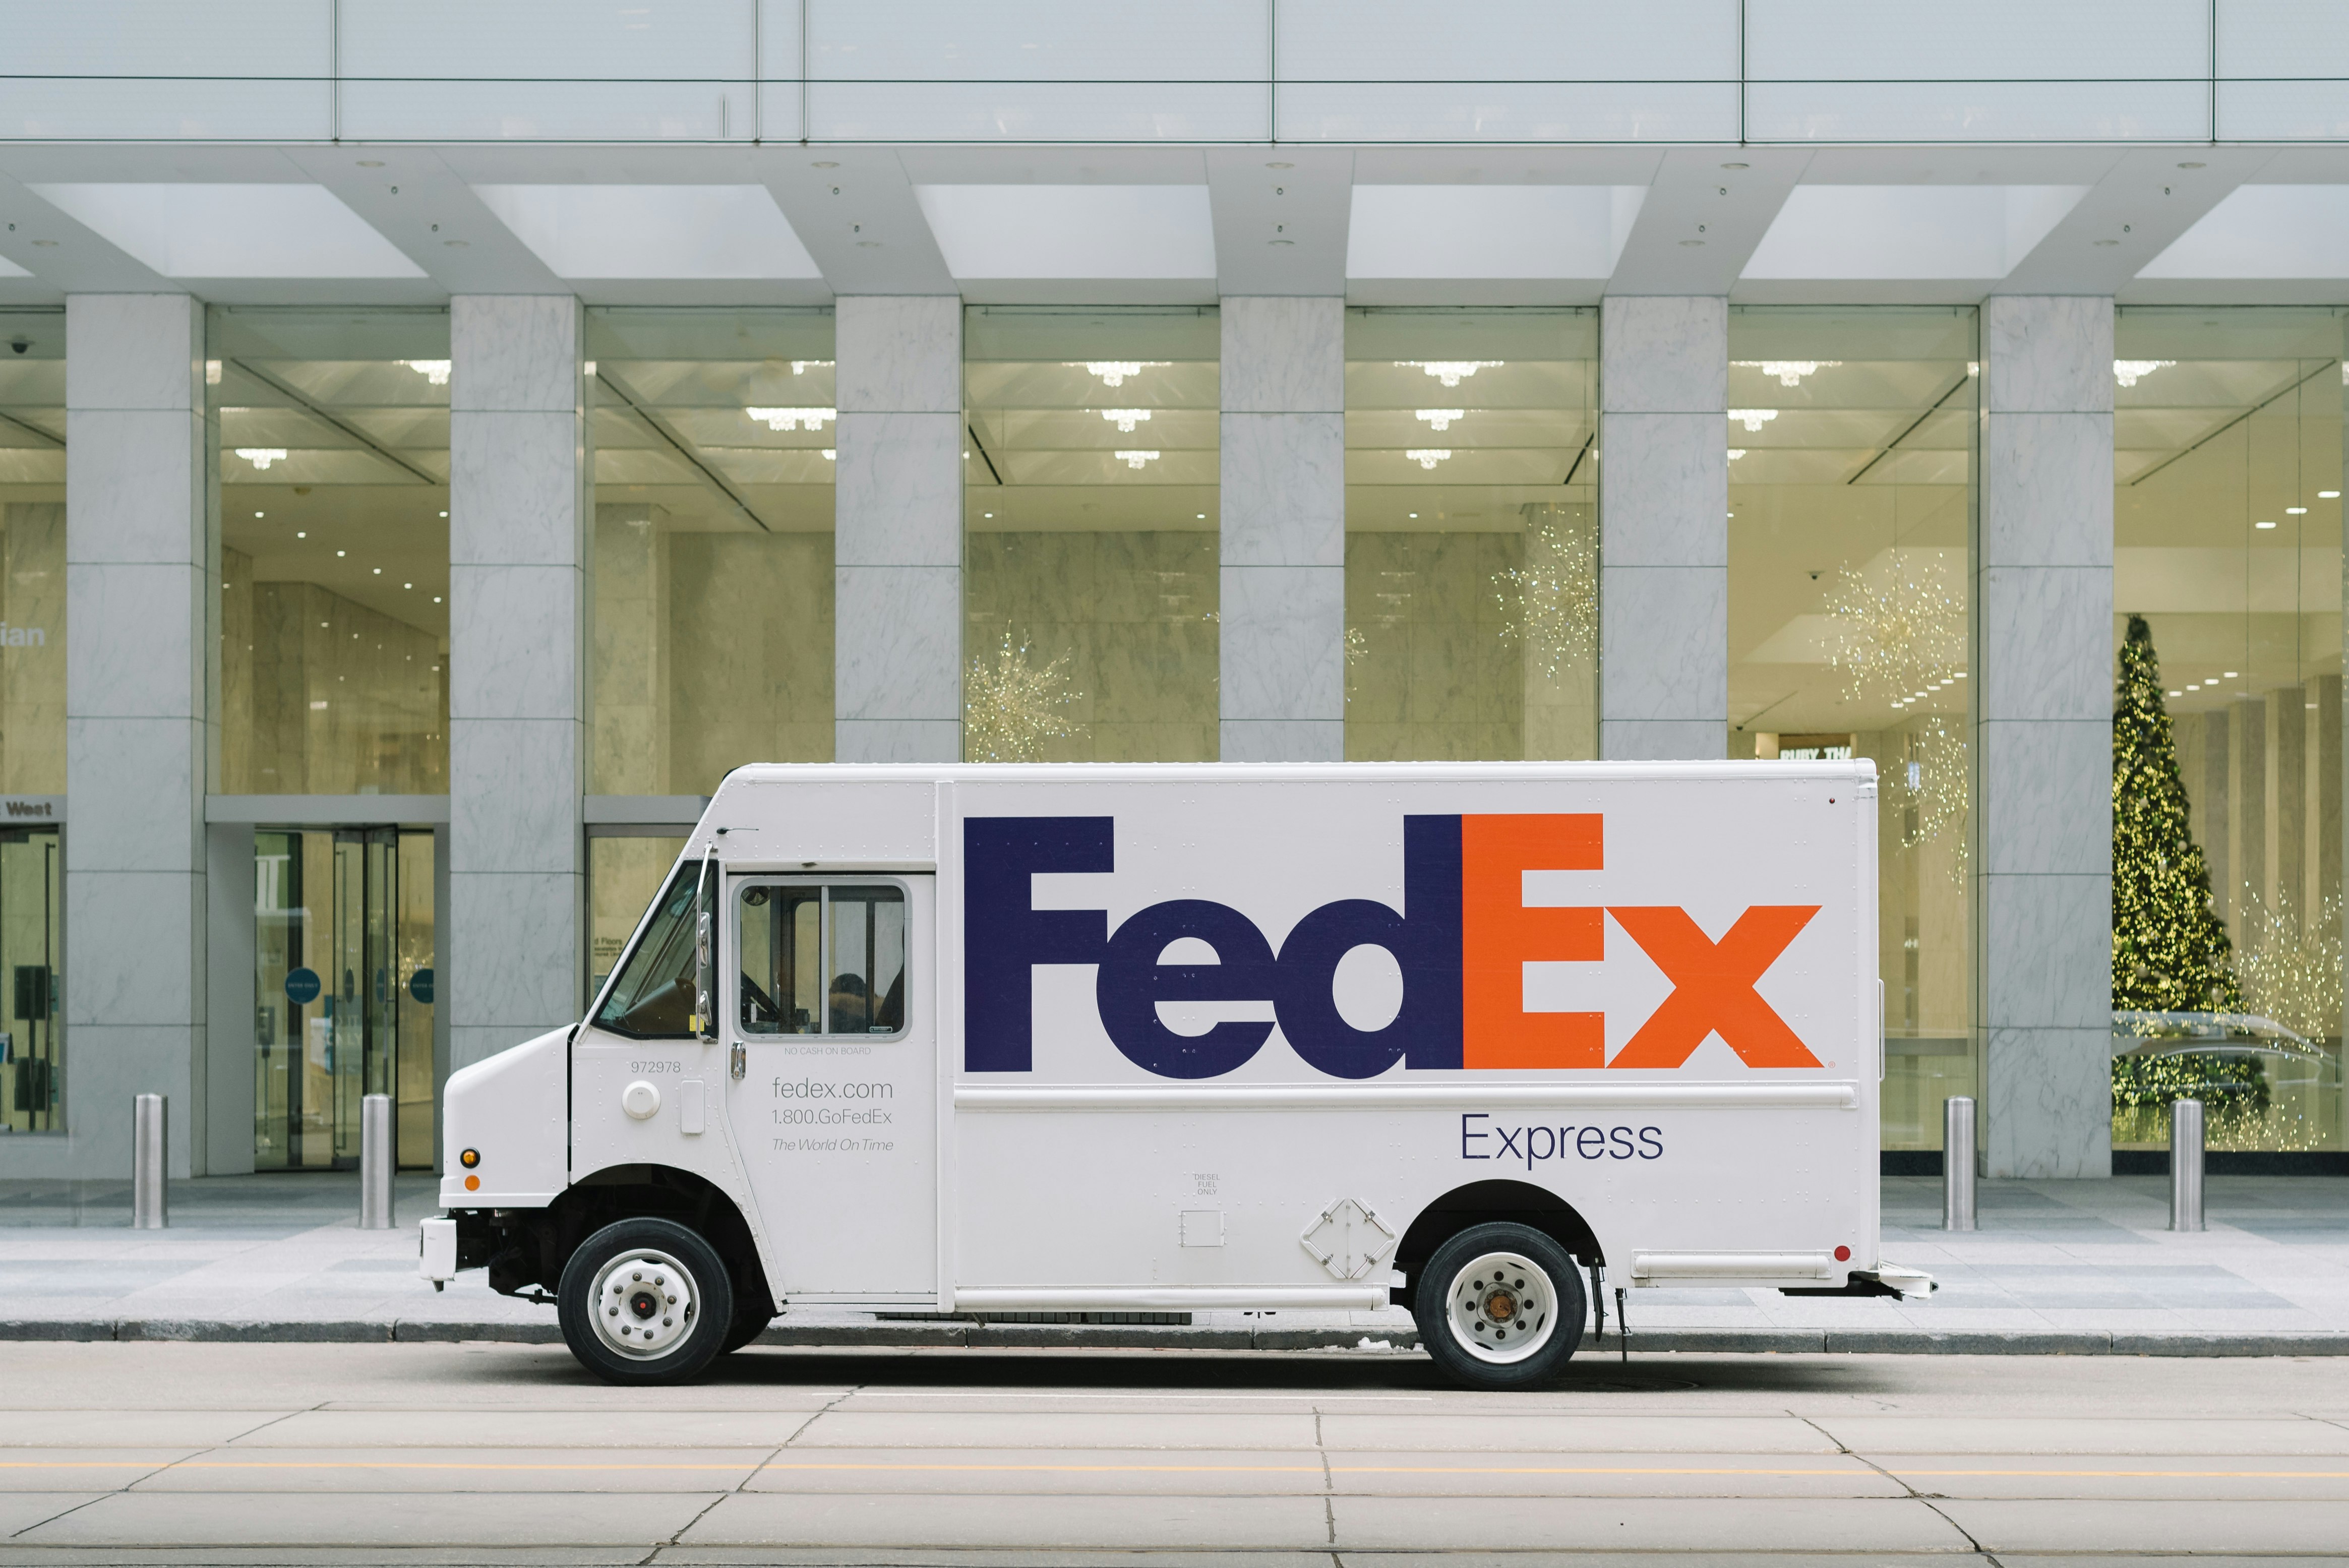 FedEx Set to Deliver 100 million more packages than it did between Black Friday to Christmas in 2019